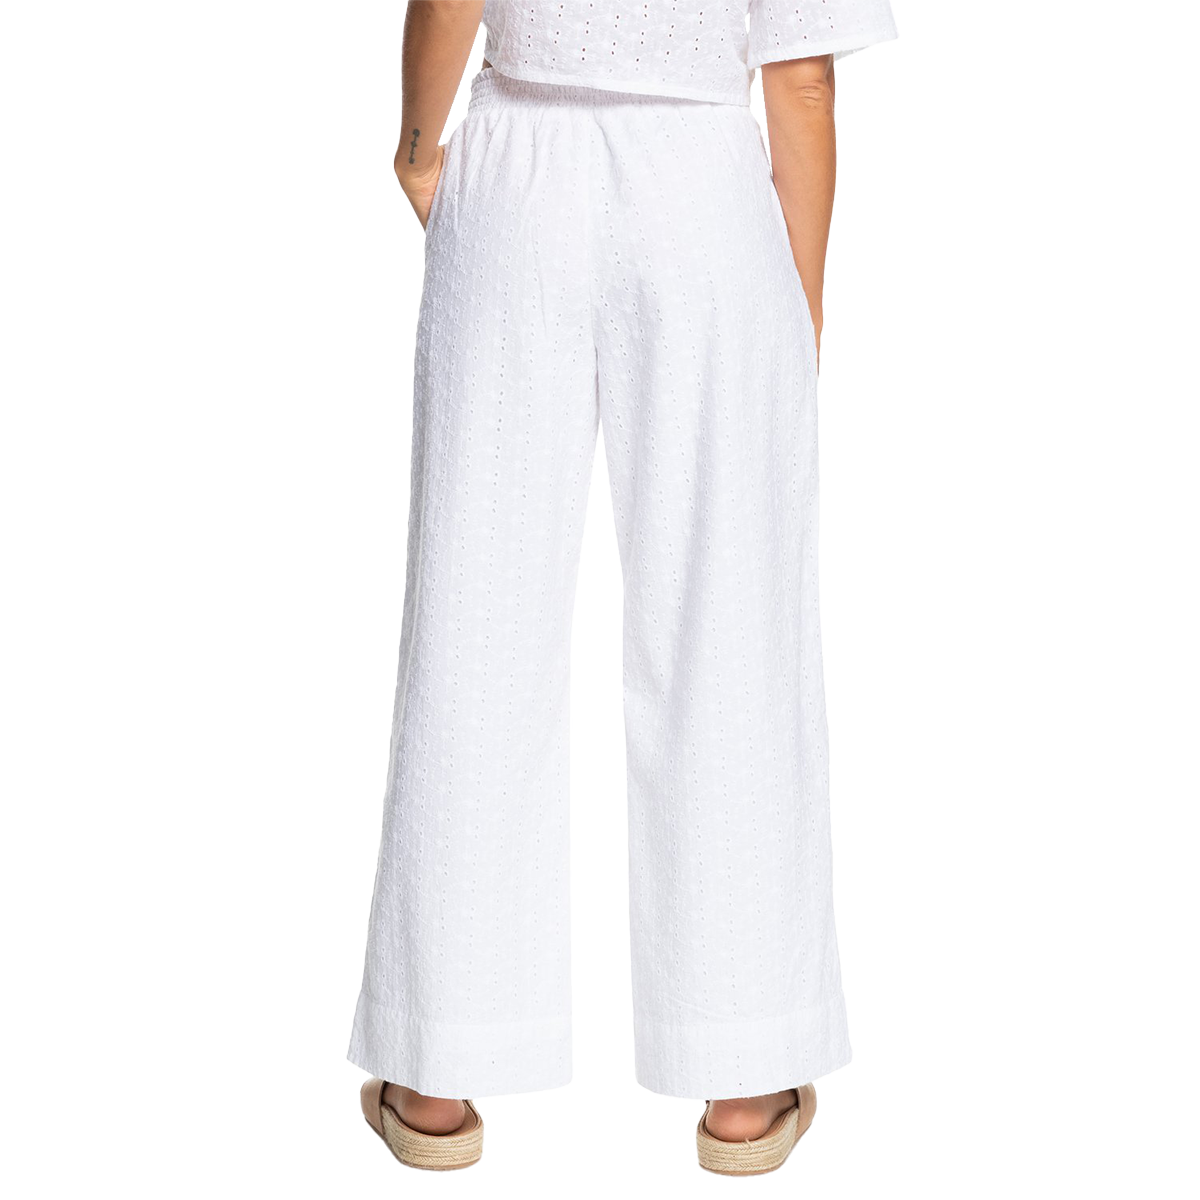 Women's By the Ocean Pant alternate view